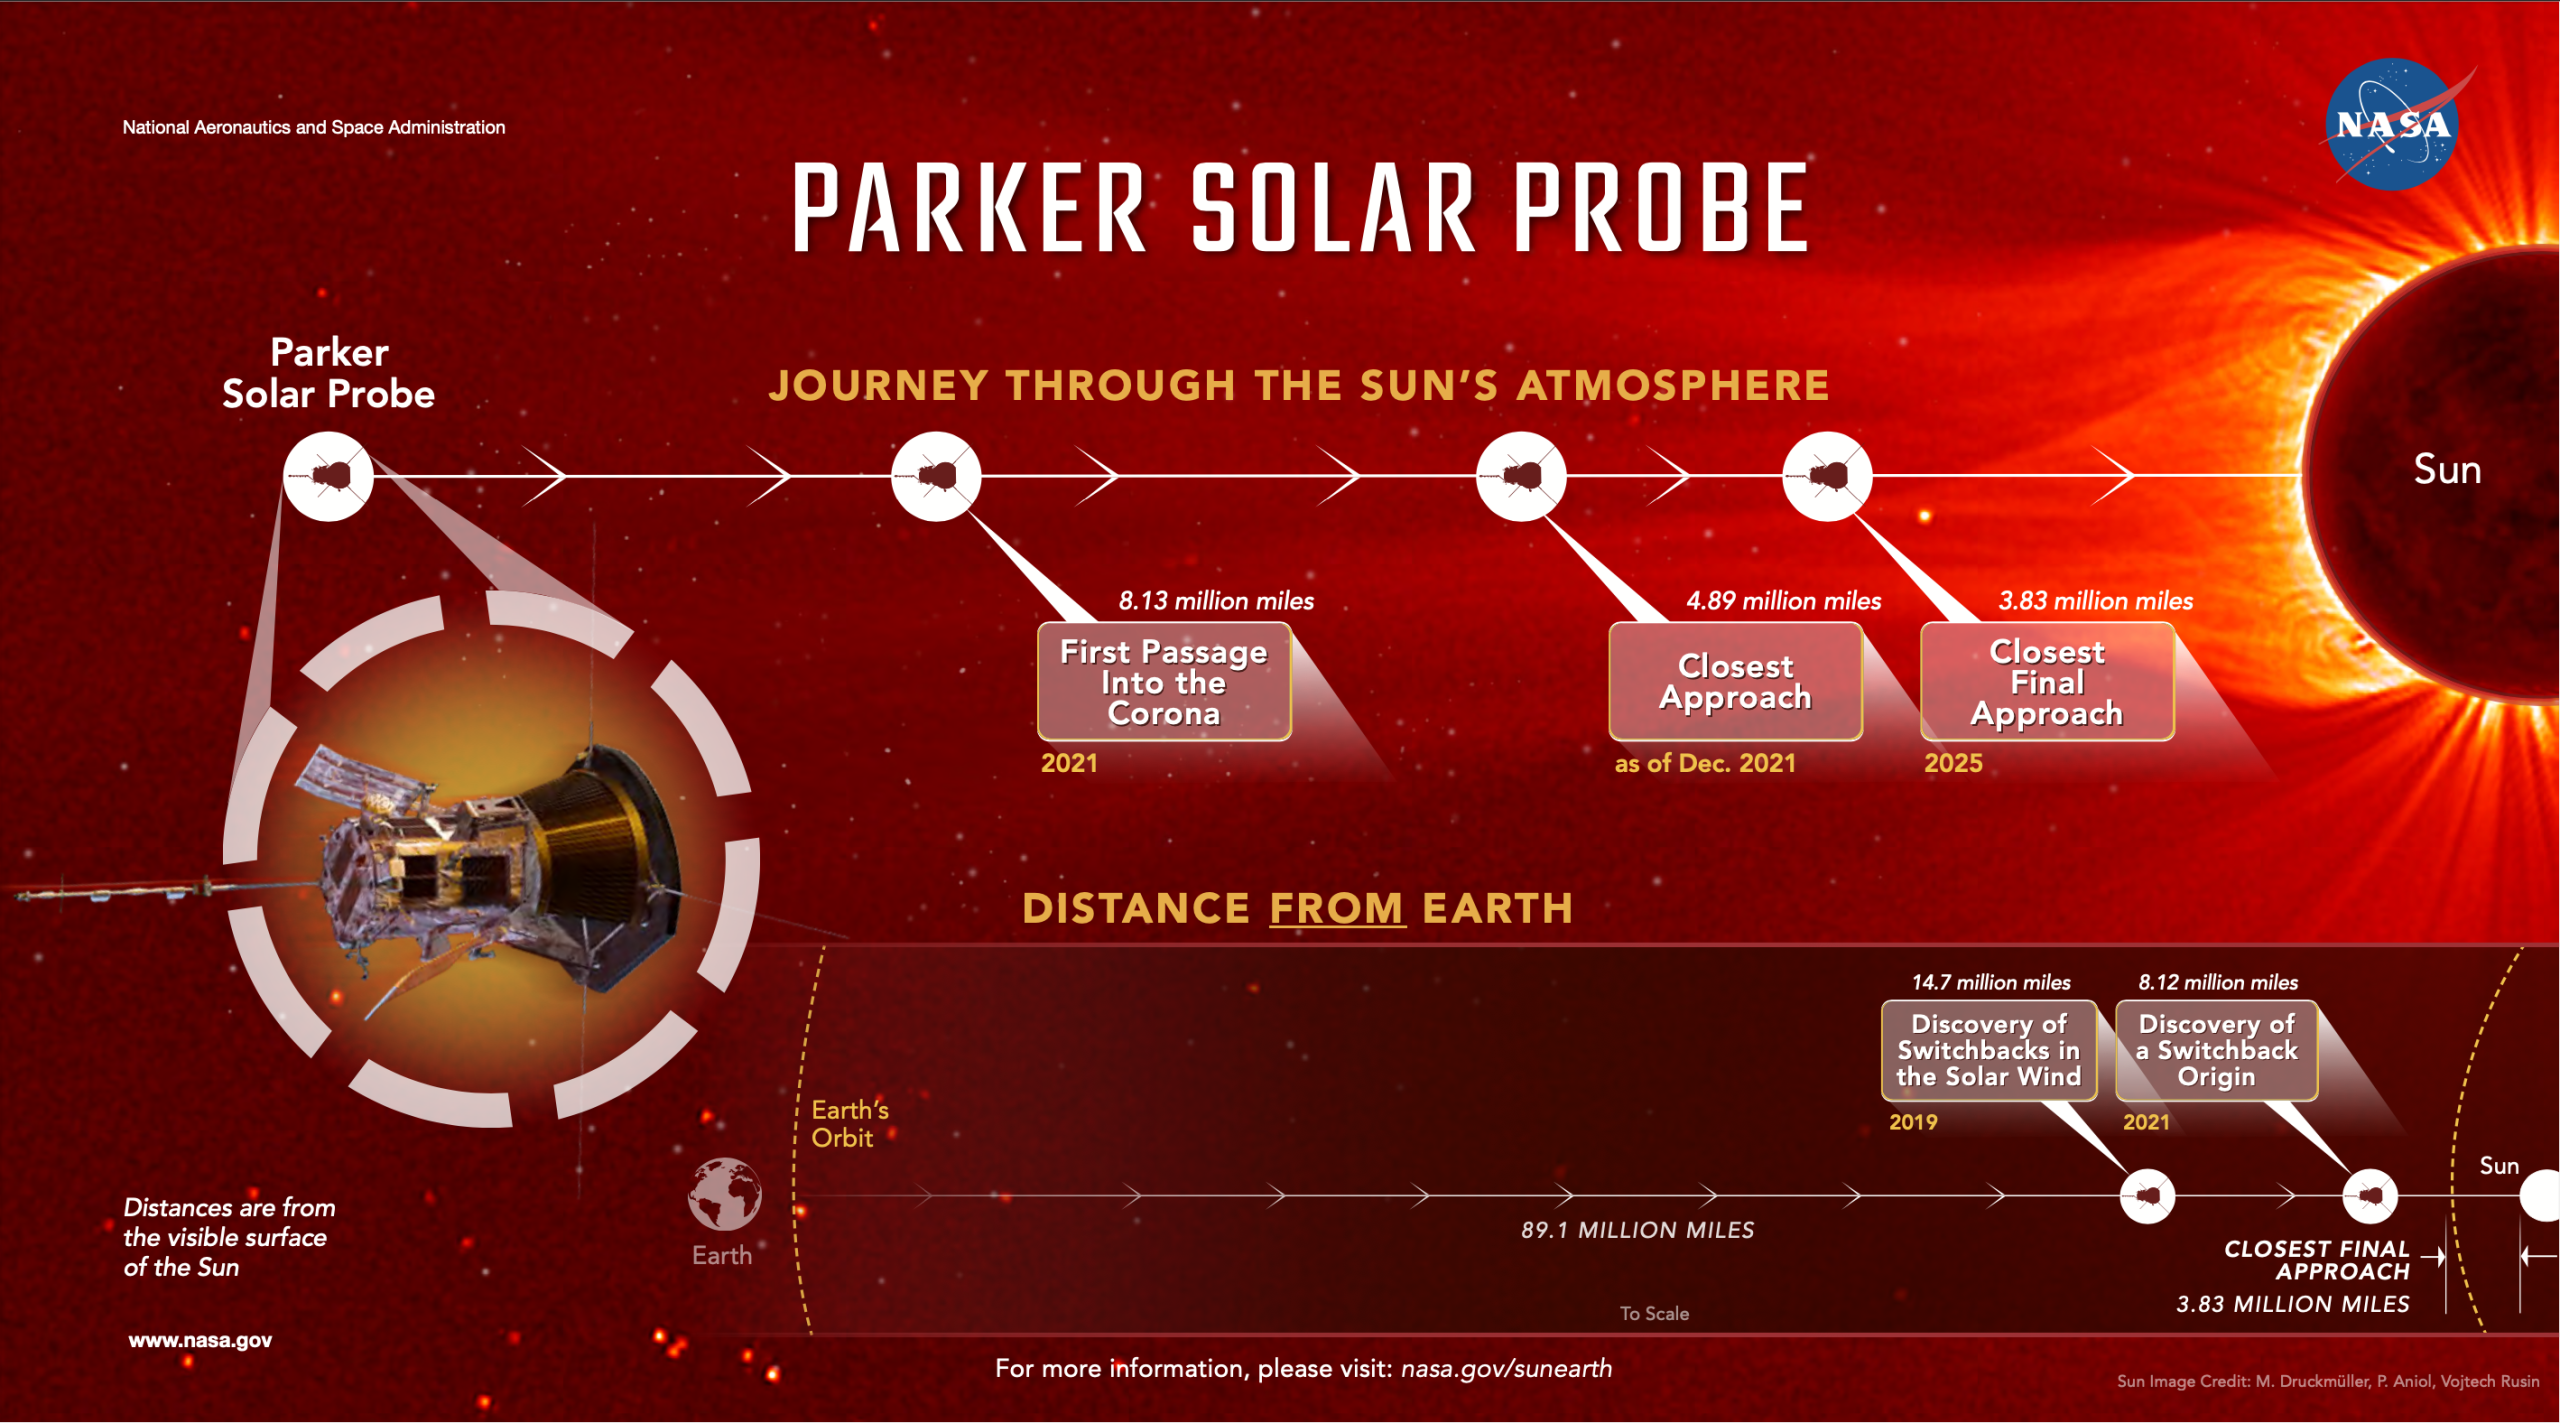 Several of the main milestones and achievements of the Parker Solar Probe on its way to the Sun. Credit: NASA's Goddard Space Flight Center/Mary P. Hrybyk-Keith